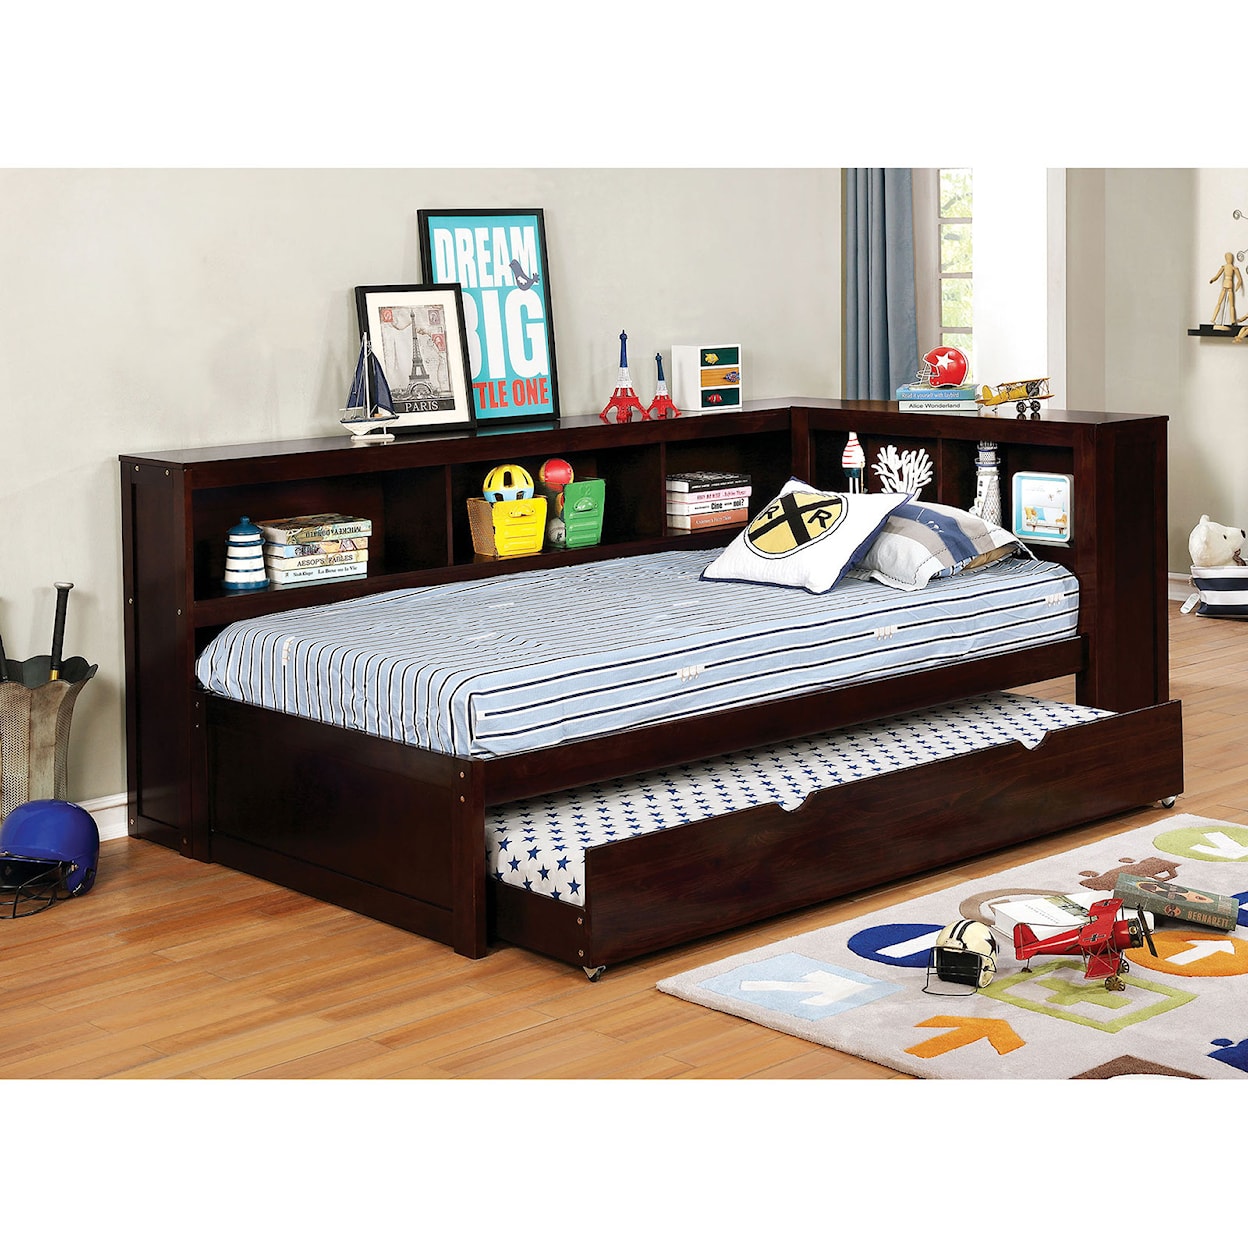 Furniture of America Frankie Full Daybed with Trundle